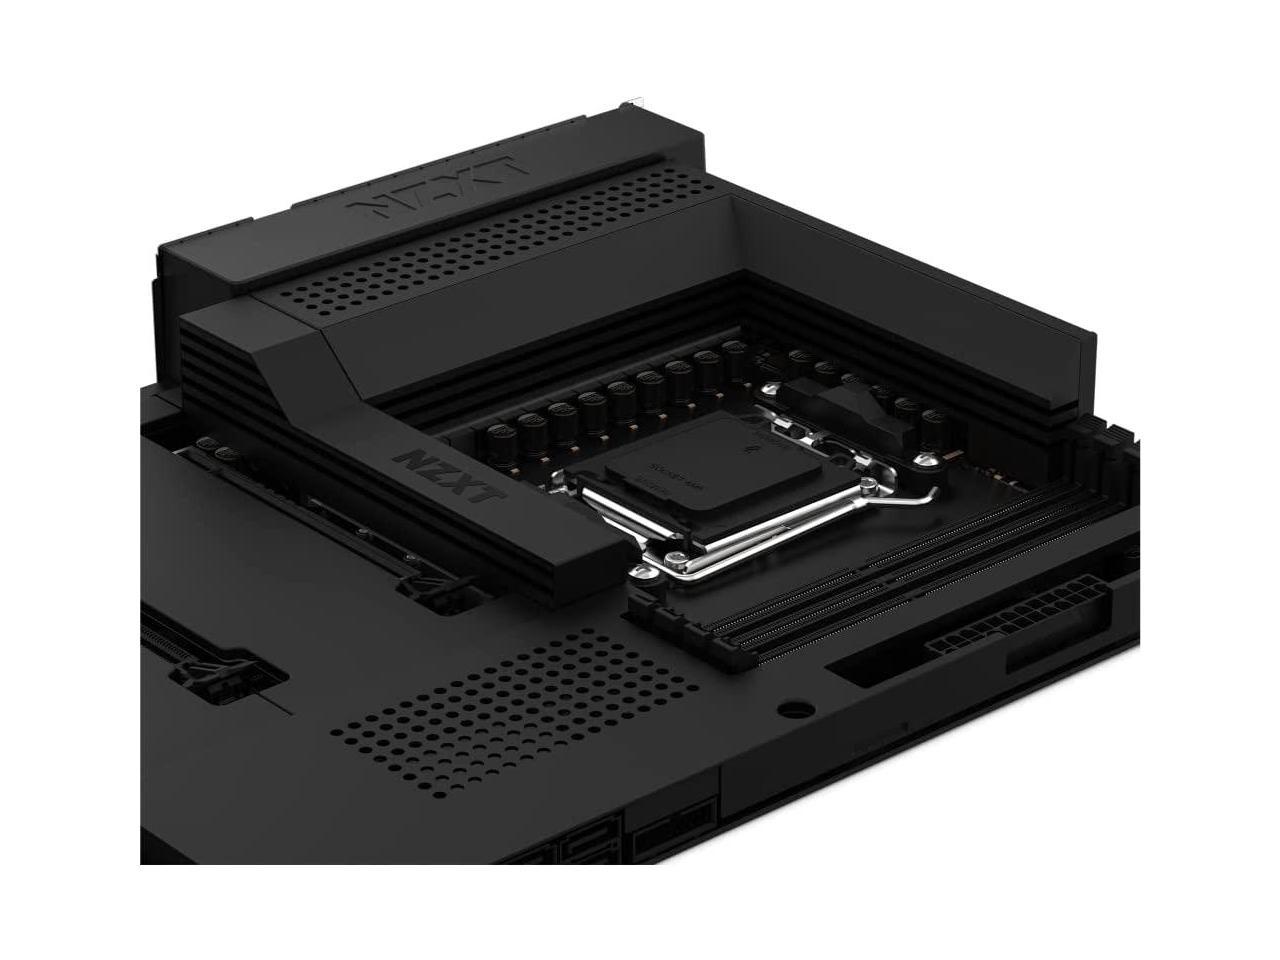 NZXT N7 B650 - N7-B65XT-B1 - AMD B650 chipset (Supports AMD 7000 Series CPUs) - ATX Gaming Motherboard - Integrated Rear I/O Shield - WiFi 6 connectivity - Black - image 4 of 16